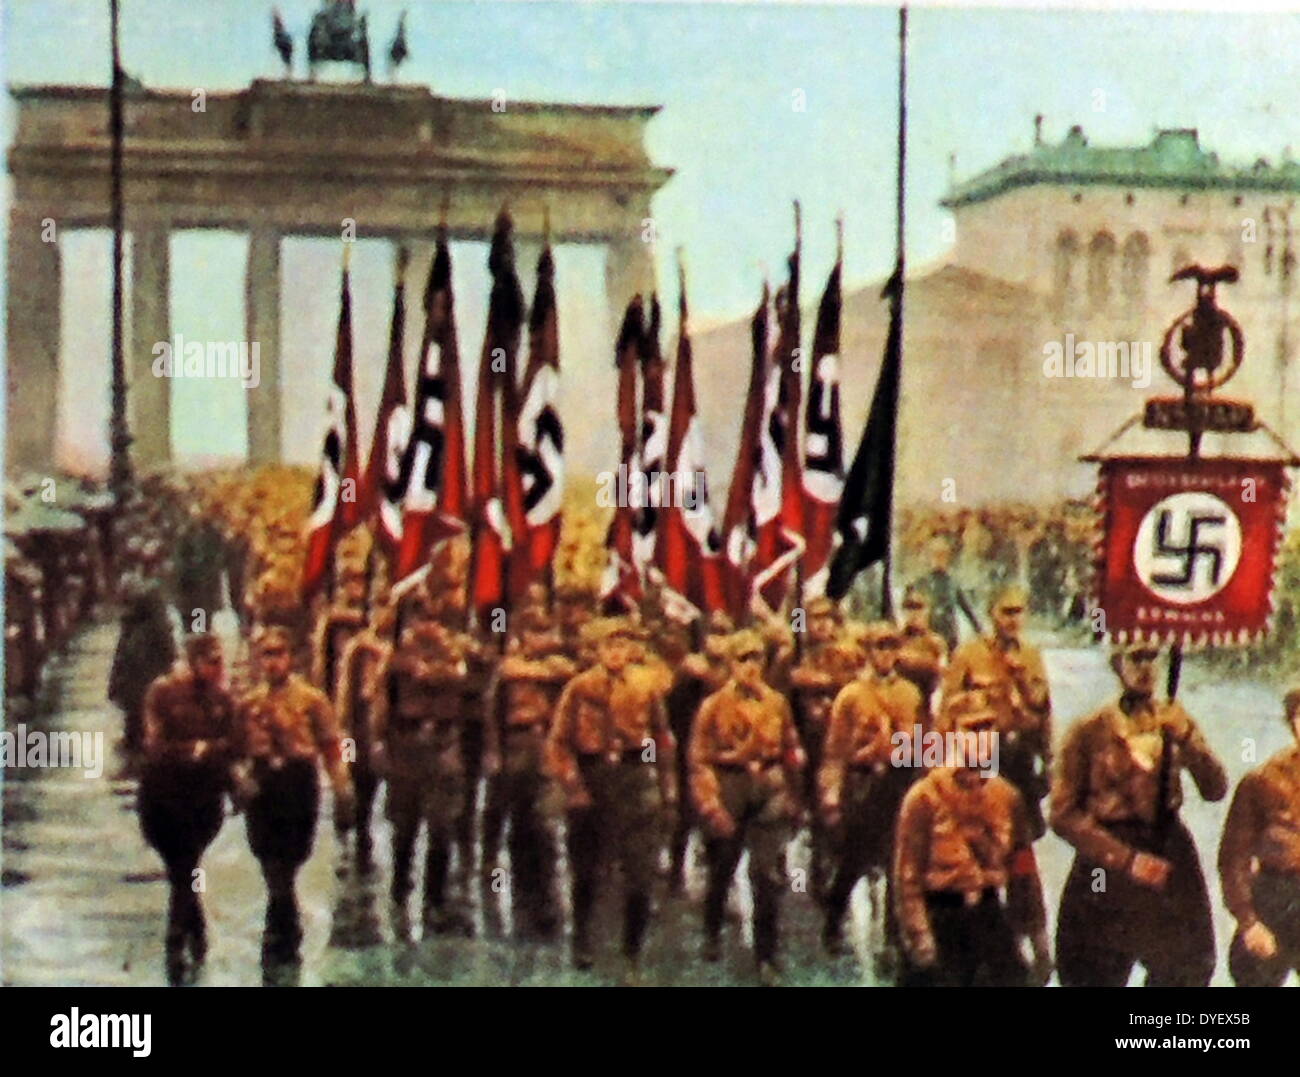 Nazi rally marches through the Brandenberg Gate in Berlin, Germany 1933 Stock Photo